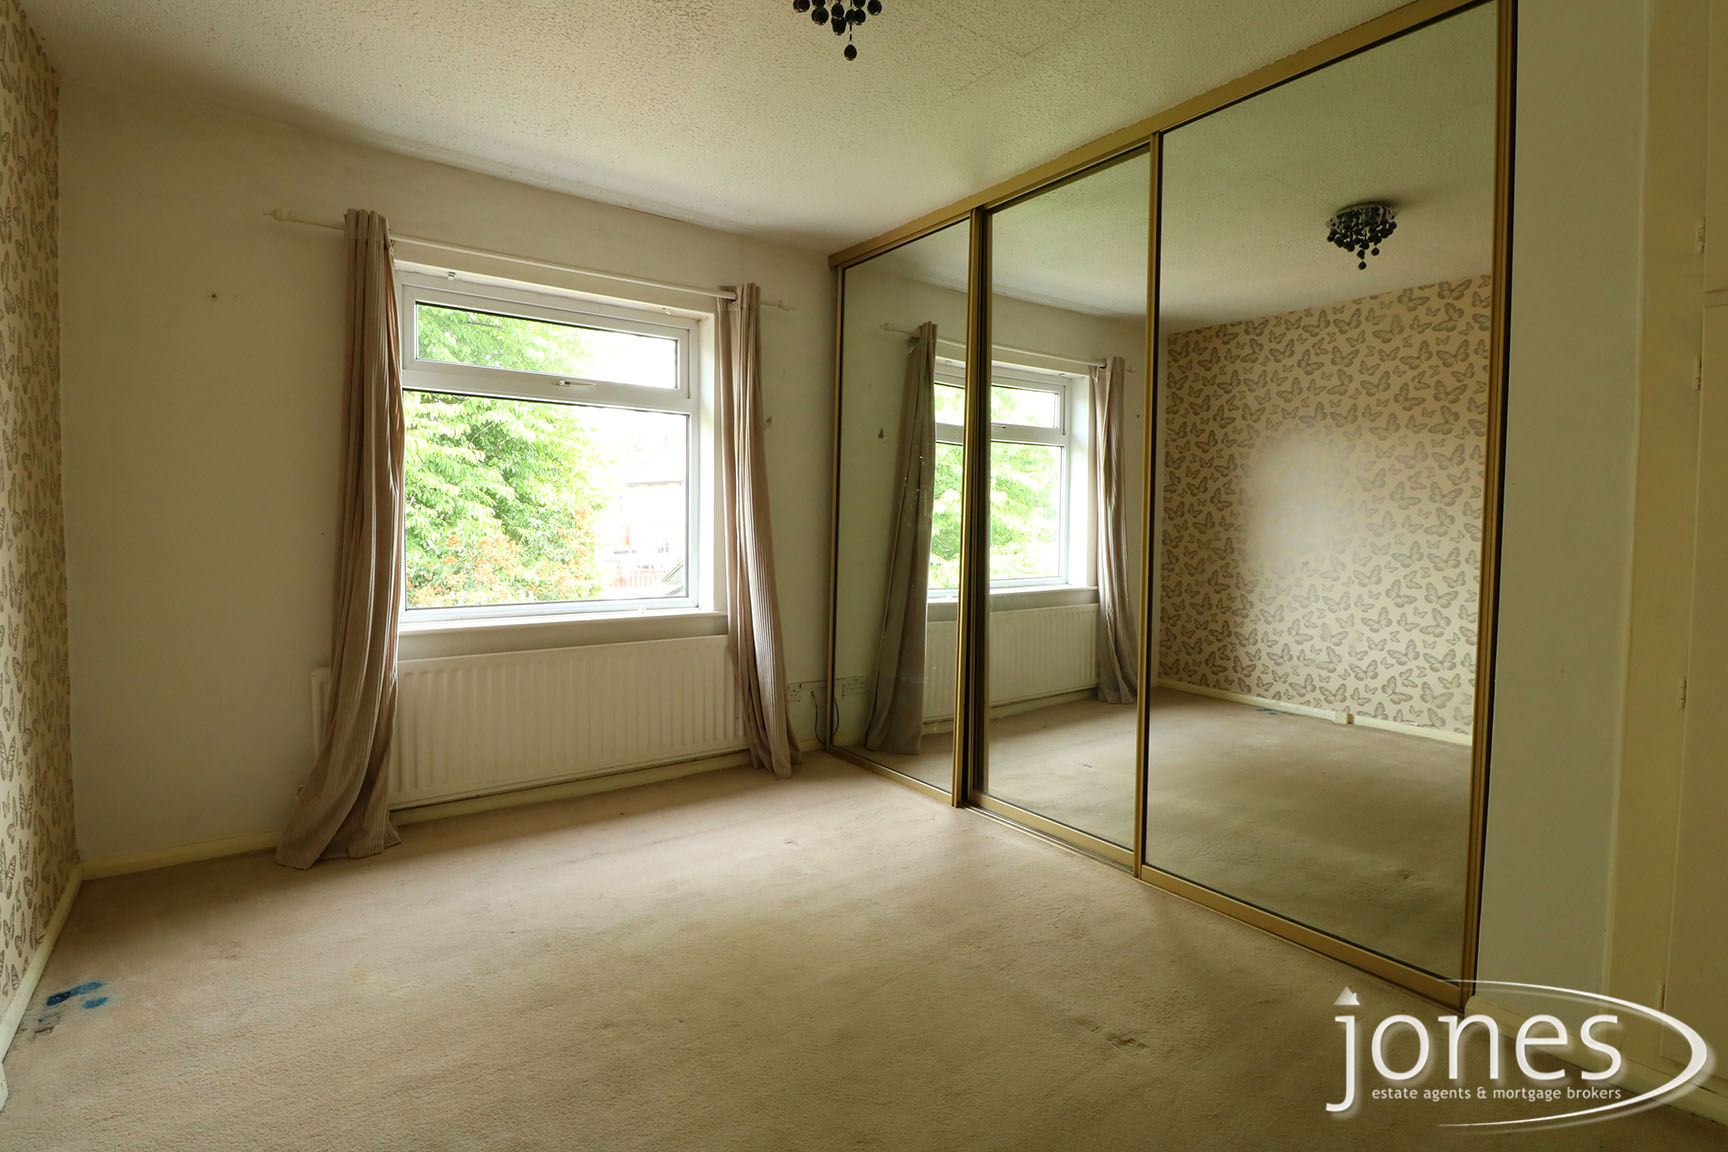 Home for Sale Let - Photo 06 Leven Road, Norton, Stockton on Tees, TS20 1DB